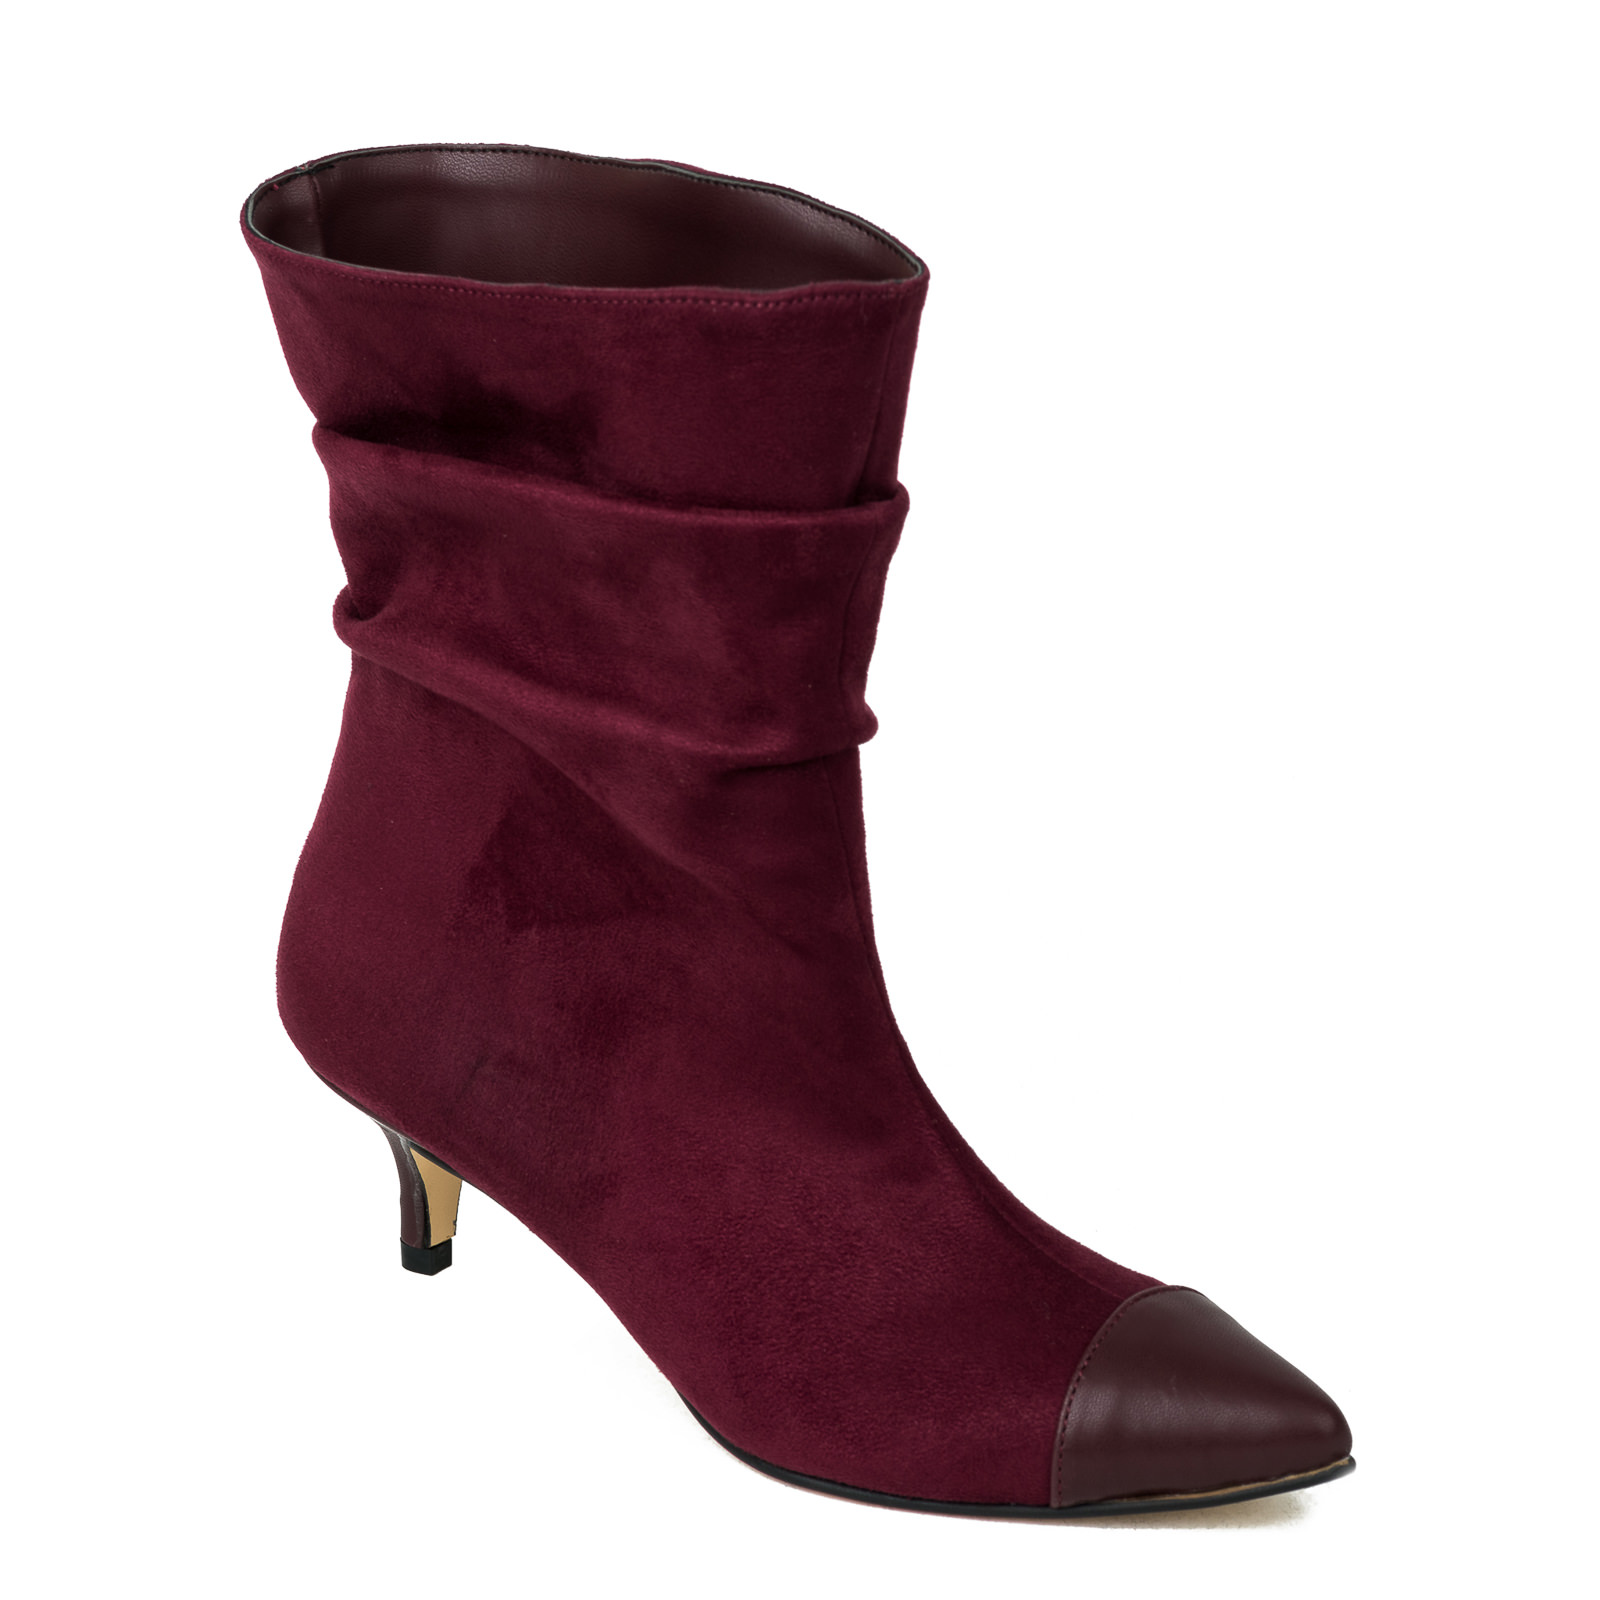 Women ankle boots B238 - WINE RED